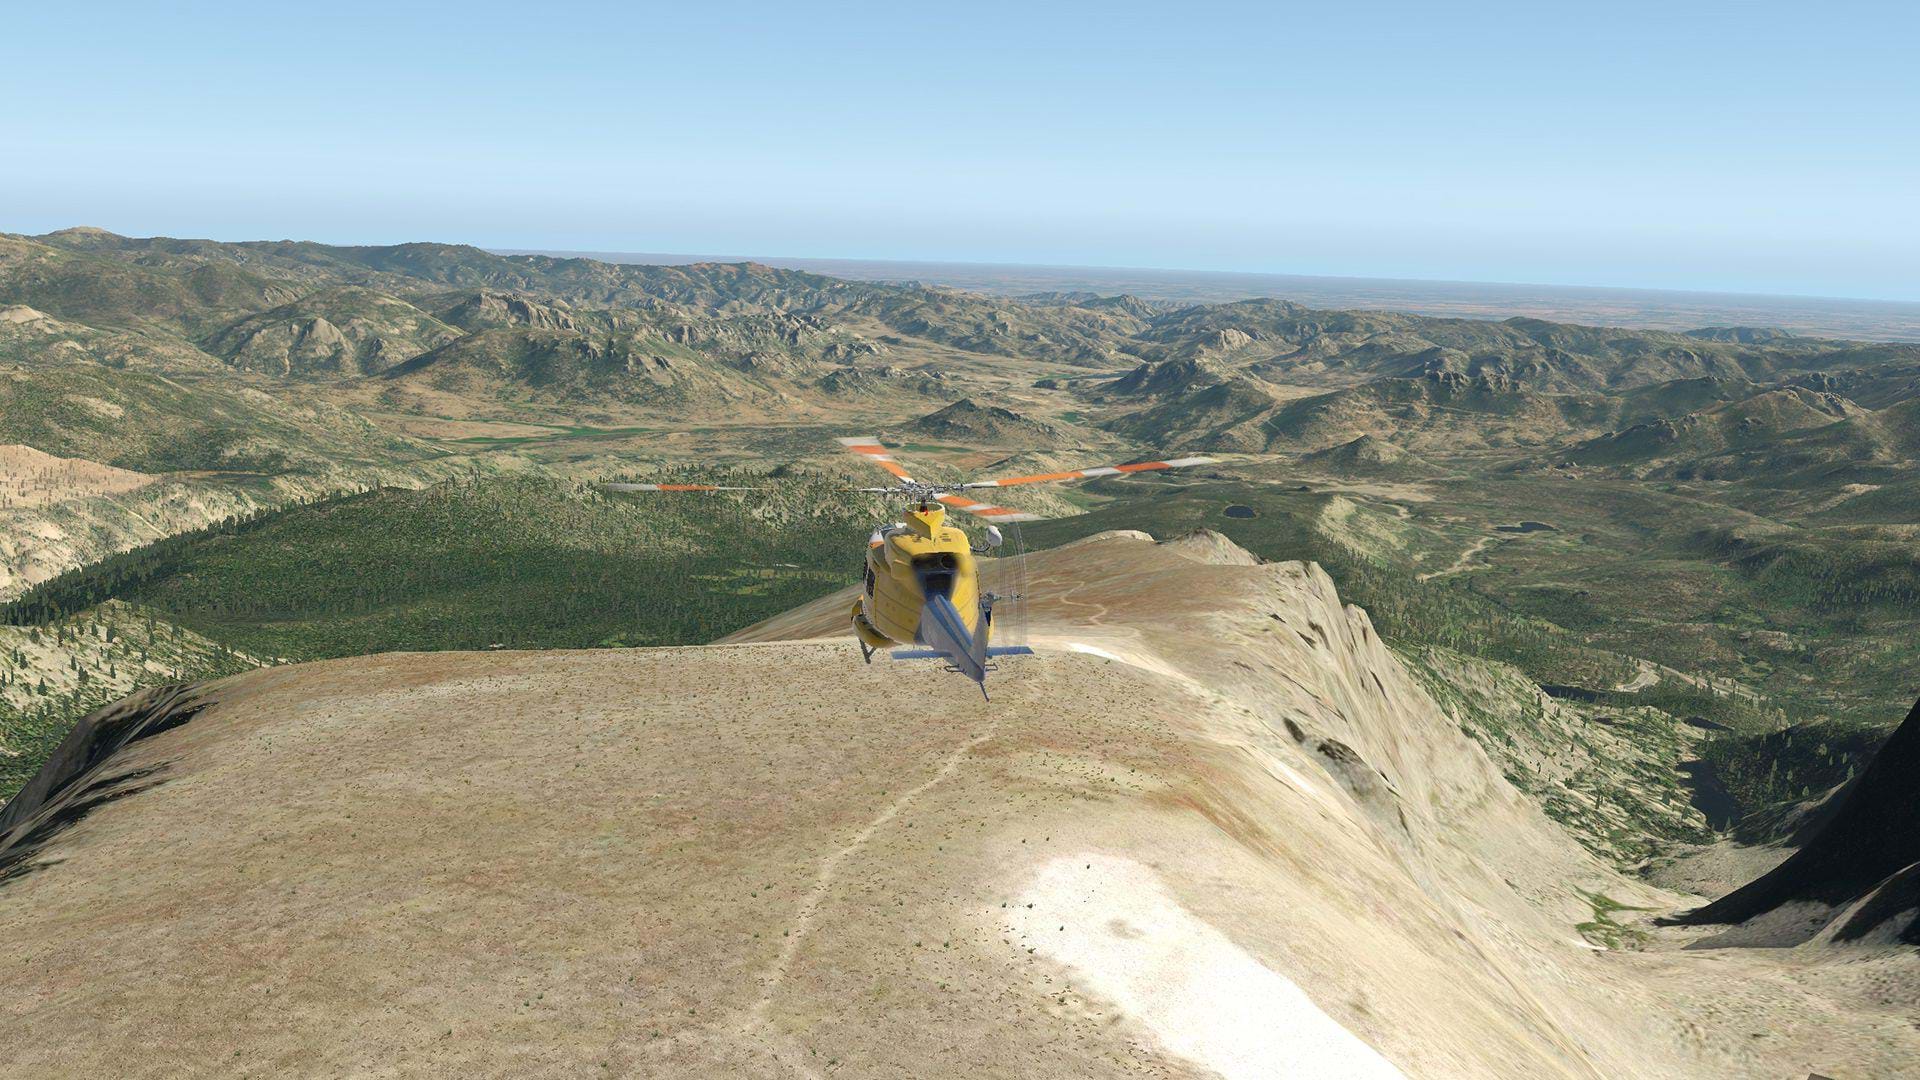 Freeware highlight: Fallon NAS (KNFL) and Poudre Valley for X-Plane